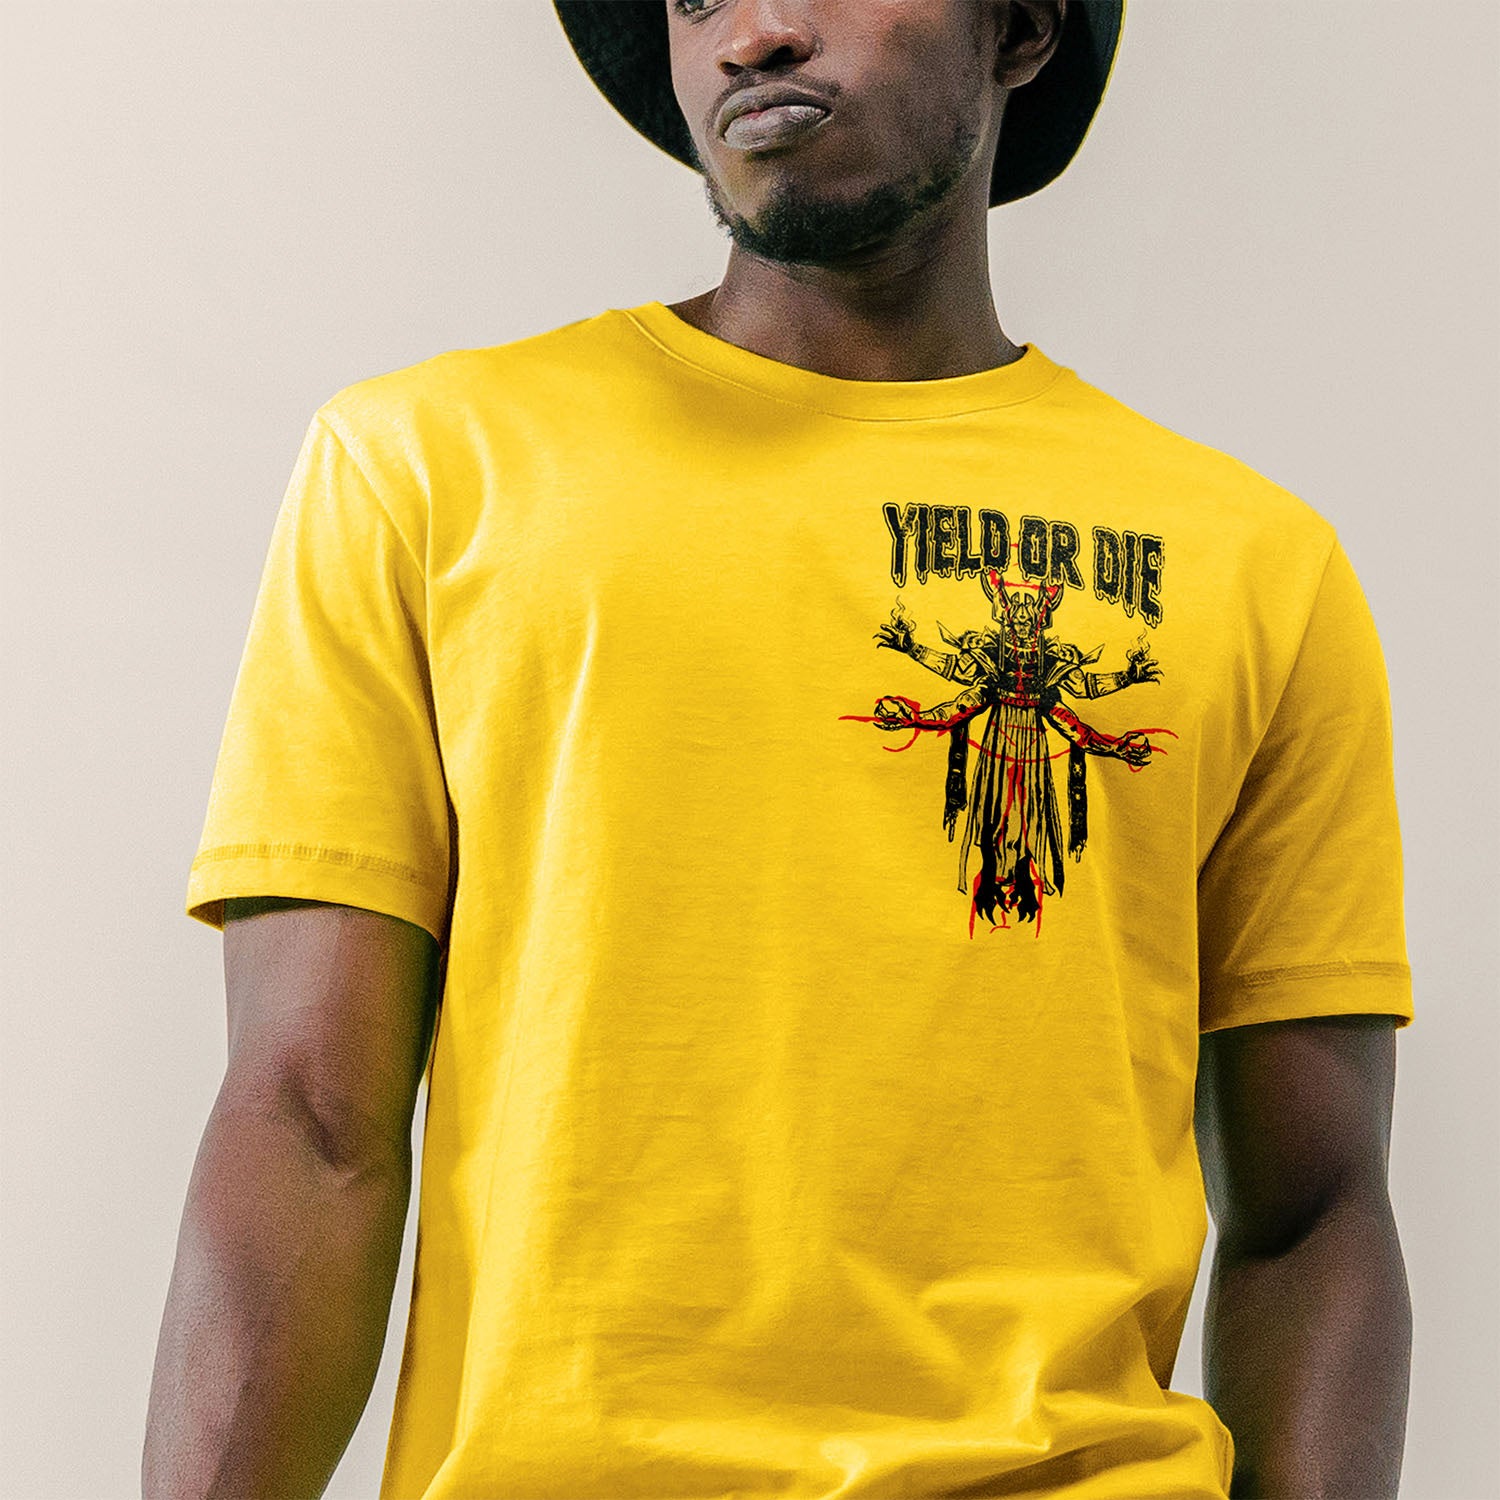 Call of Duty Gold Yield or Die T-Shirt - Model Shot